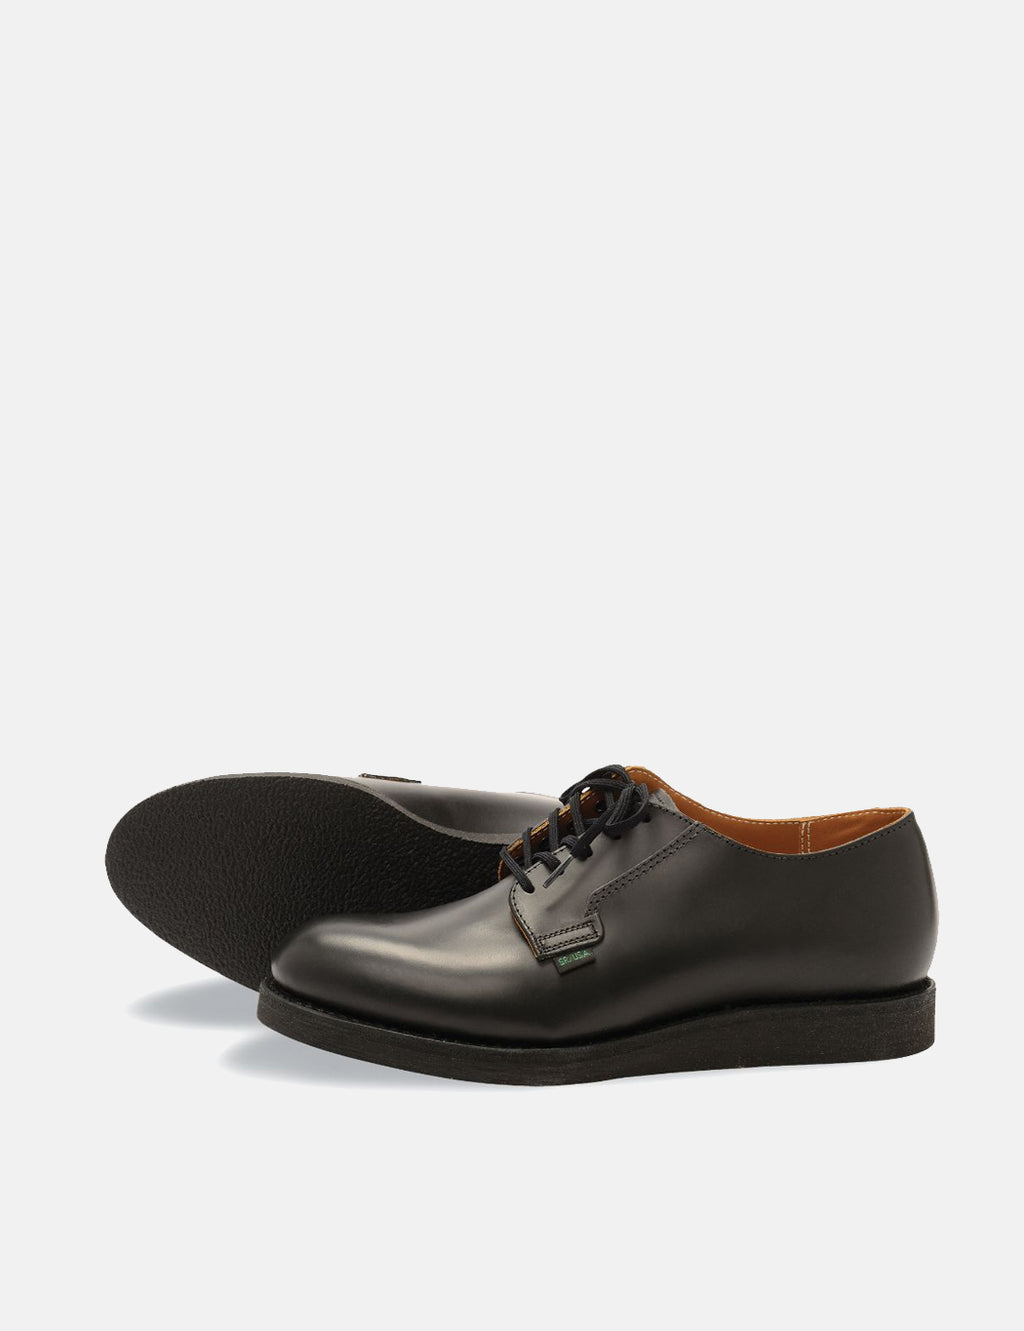 Red Wing Postman Oxford (101) - Black | UrbanExcess.com – URBAN EXCESS